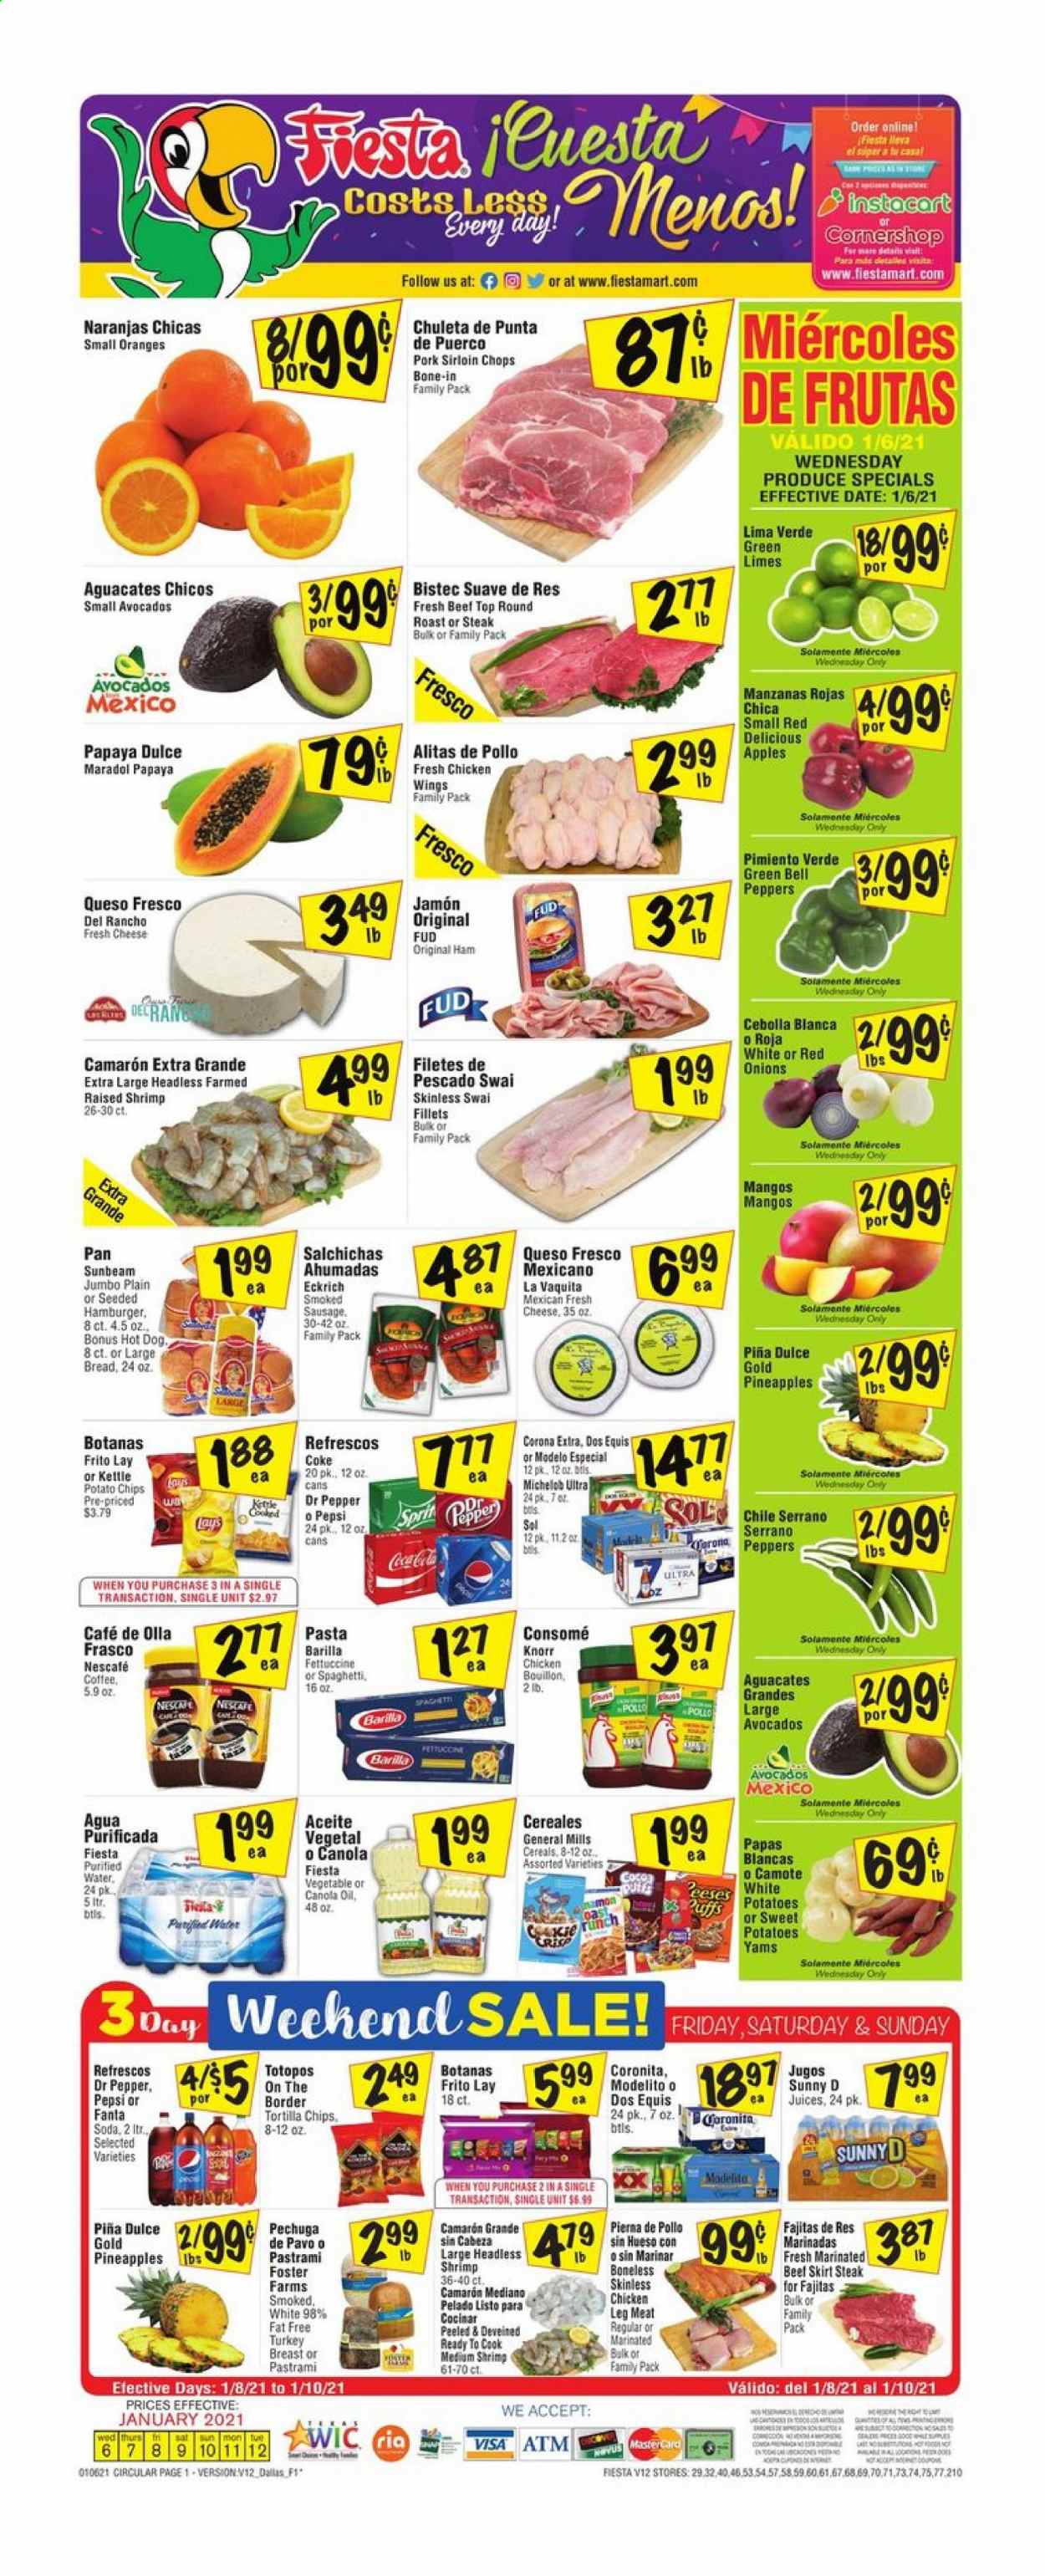 thumbnail - Fiesta Mart Flyer - 01/06/2021 - 01/12/2021 - Sales products - Dos Equis, Michelob, sweet potato, papaya, bread, puffs, apples, oranges, shrimps, hot dog, hamburger, Knorr, Barilla, ham, sausage, smoked sausage, queso fresco, cheese, mango, tortilla chips, potato chips, chips, Lay’s, Mexicano, bouillon, cereals, pasta, canola oil, Coca-Cola, Pepsi, soda, juice, Fanta, Dr. Pepper, purified water, Nescafé, beer, Corona Extra, Sol, turkey breast, beef meat, pastrami, steak, round roast, pork loin, Suave, skirt, Sunbeam, avocado, limes, Red Delicious apples, pineapple. Page 1.